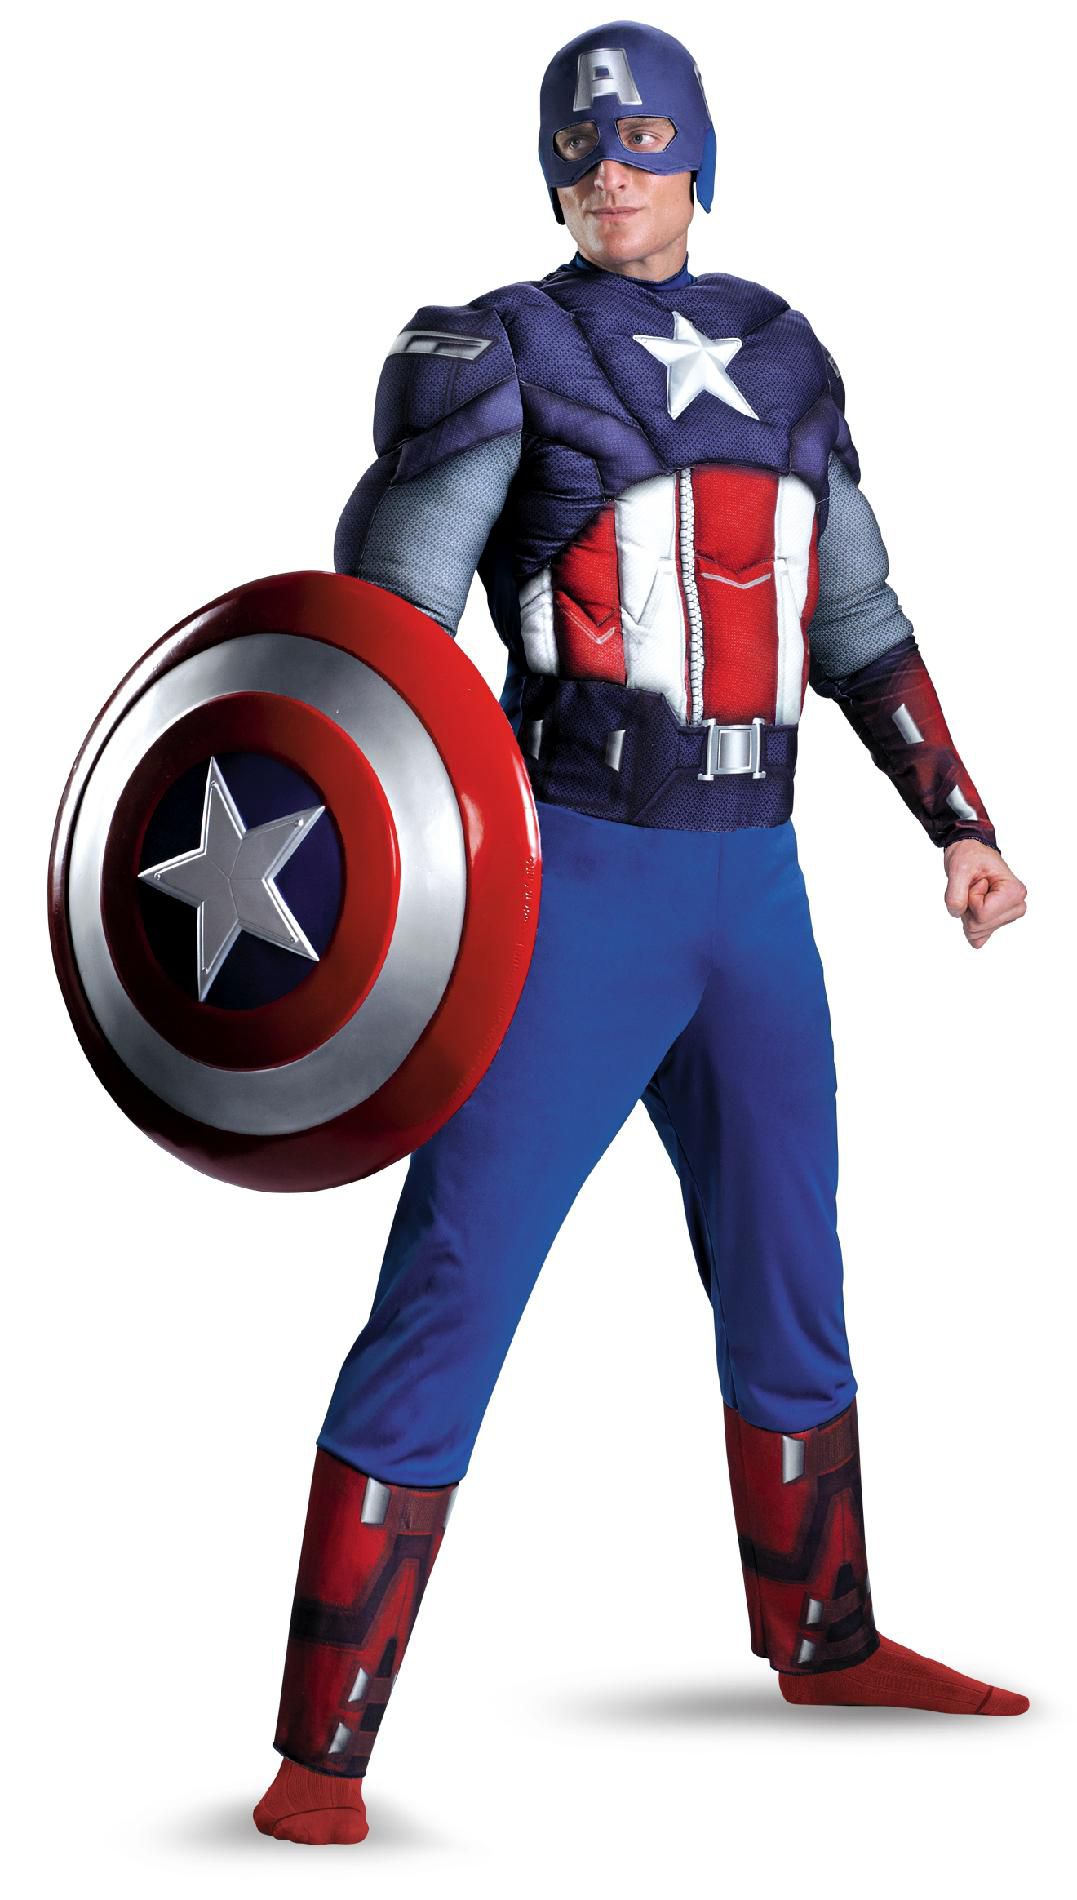 The Avengers Captain America Classic Muscle Adult Men's Halloween Costume